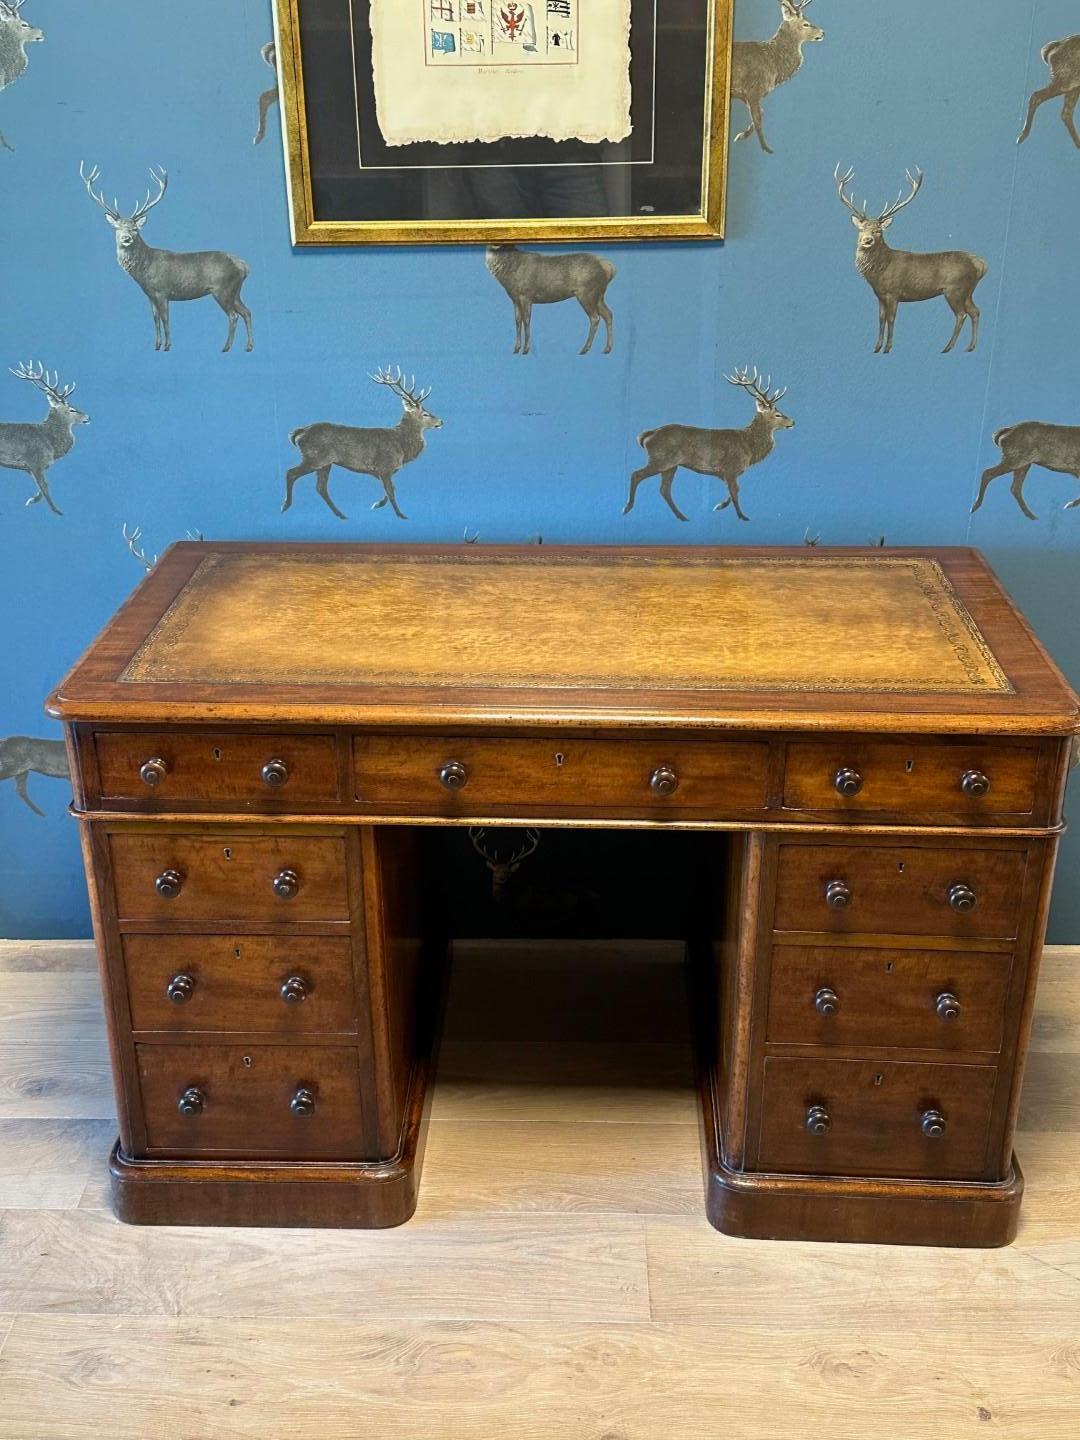 Beautiful small mahogany desk in perfect condition. The desk has 9 drawers and a tan-colored gold-edged leather top. Original wooden knobs on the drawers. Nice warm color. Desk is from the maker Maple & Co (Stamp in drawer), which is known for its